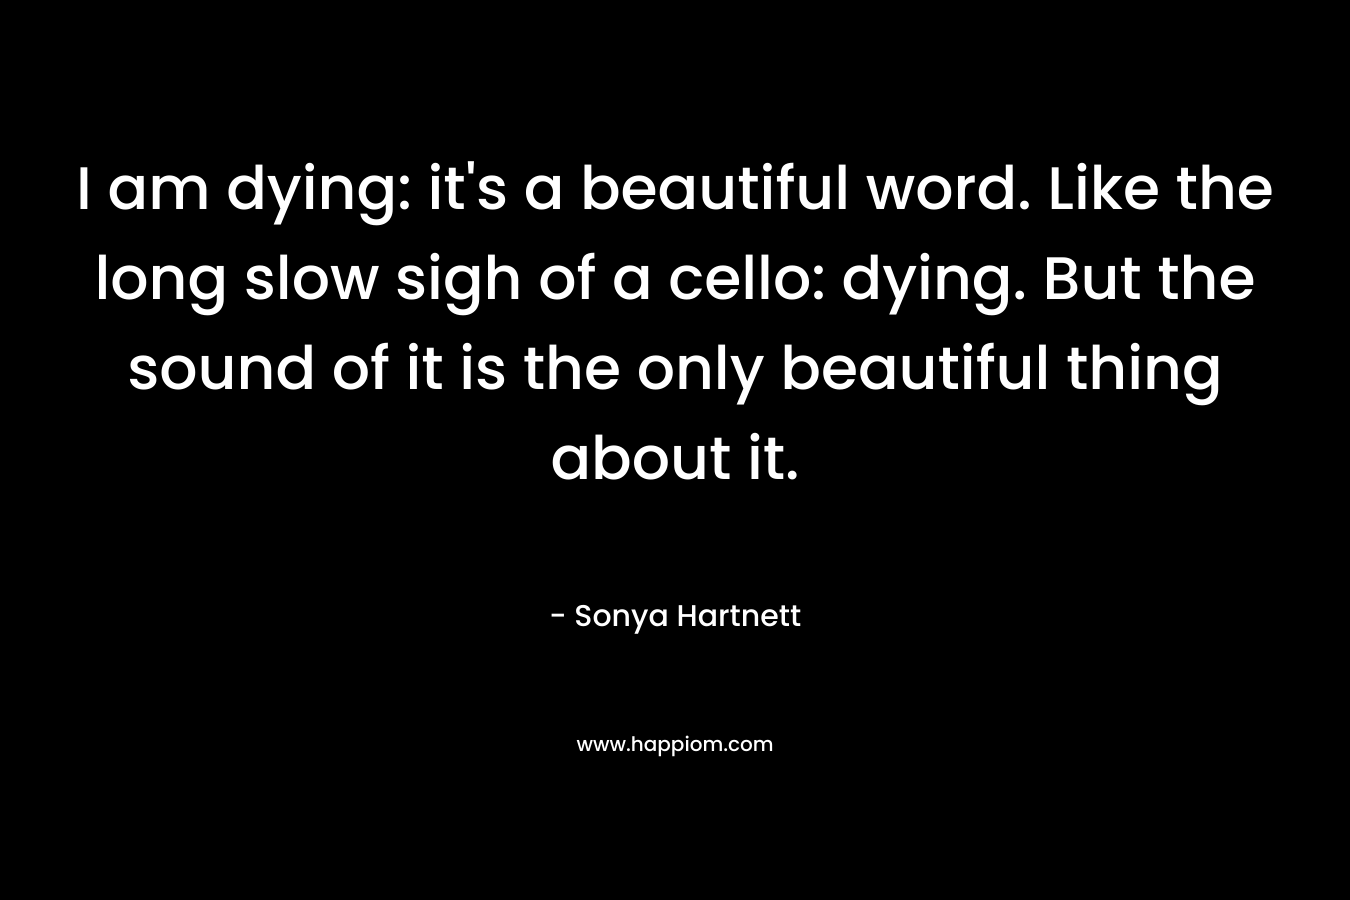 I am dying: it's a beautiful word. Like the long slow sigh of a cello: dying. But the sound of it is the only beautiful thing about it.